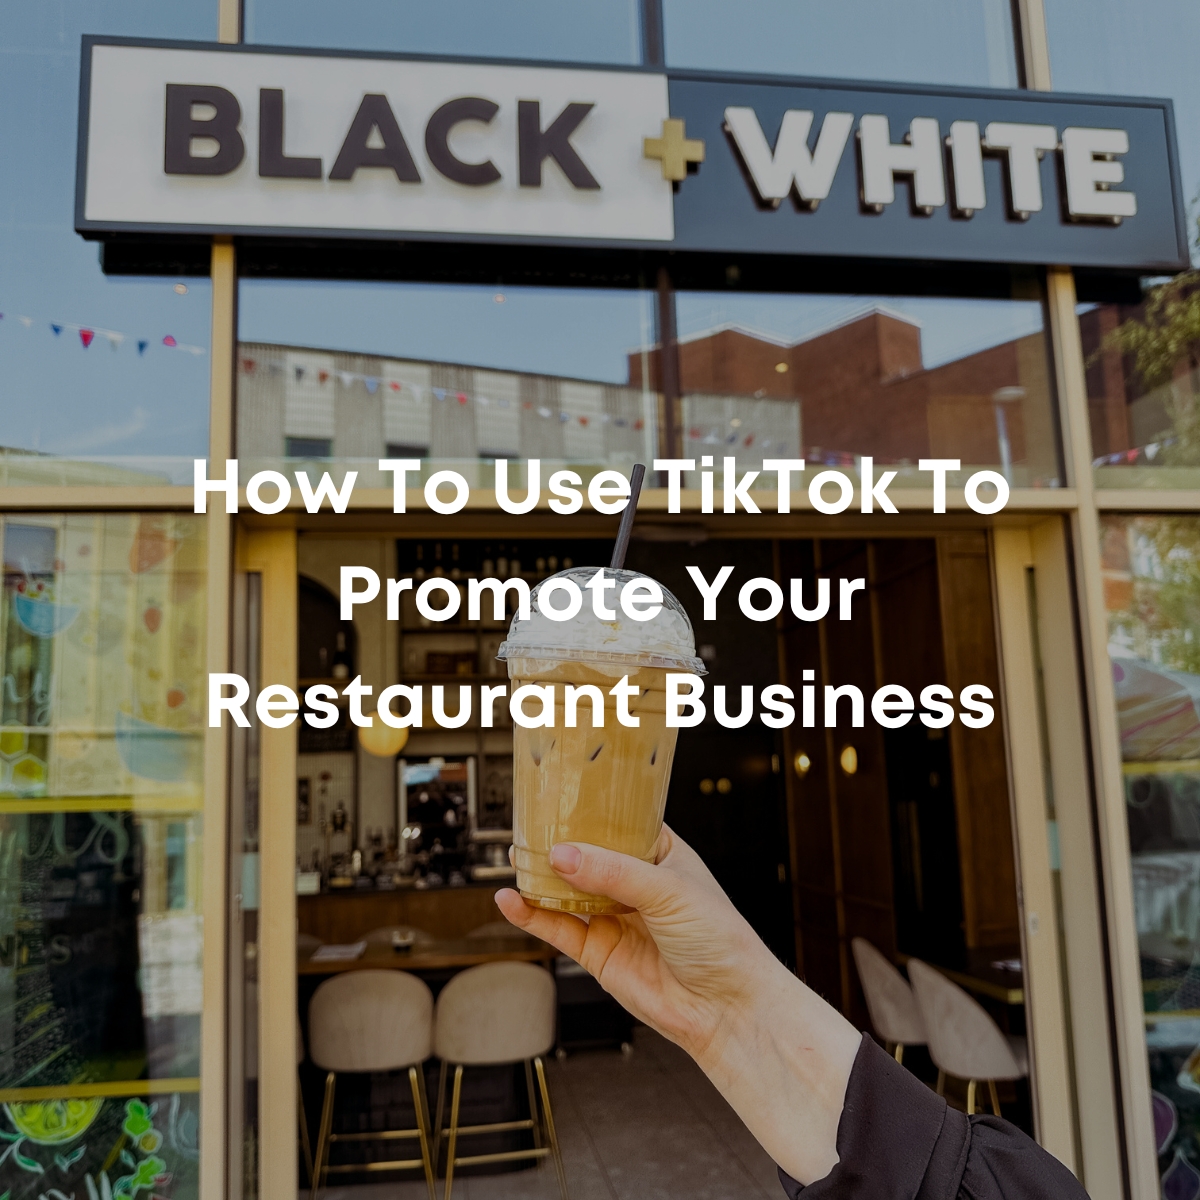 How To Use TikTok to Promote Your Restaurant Business